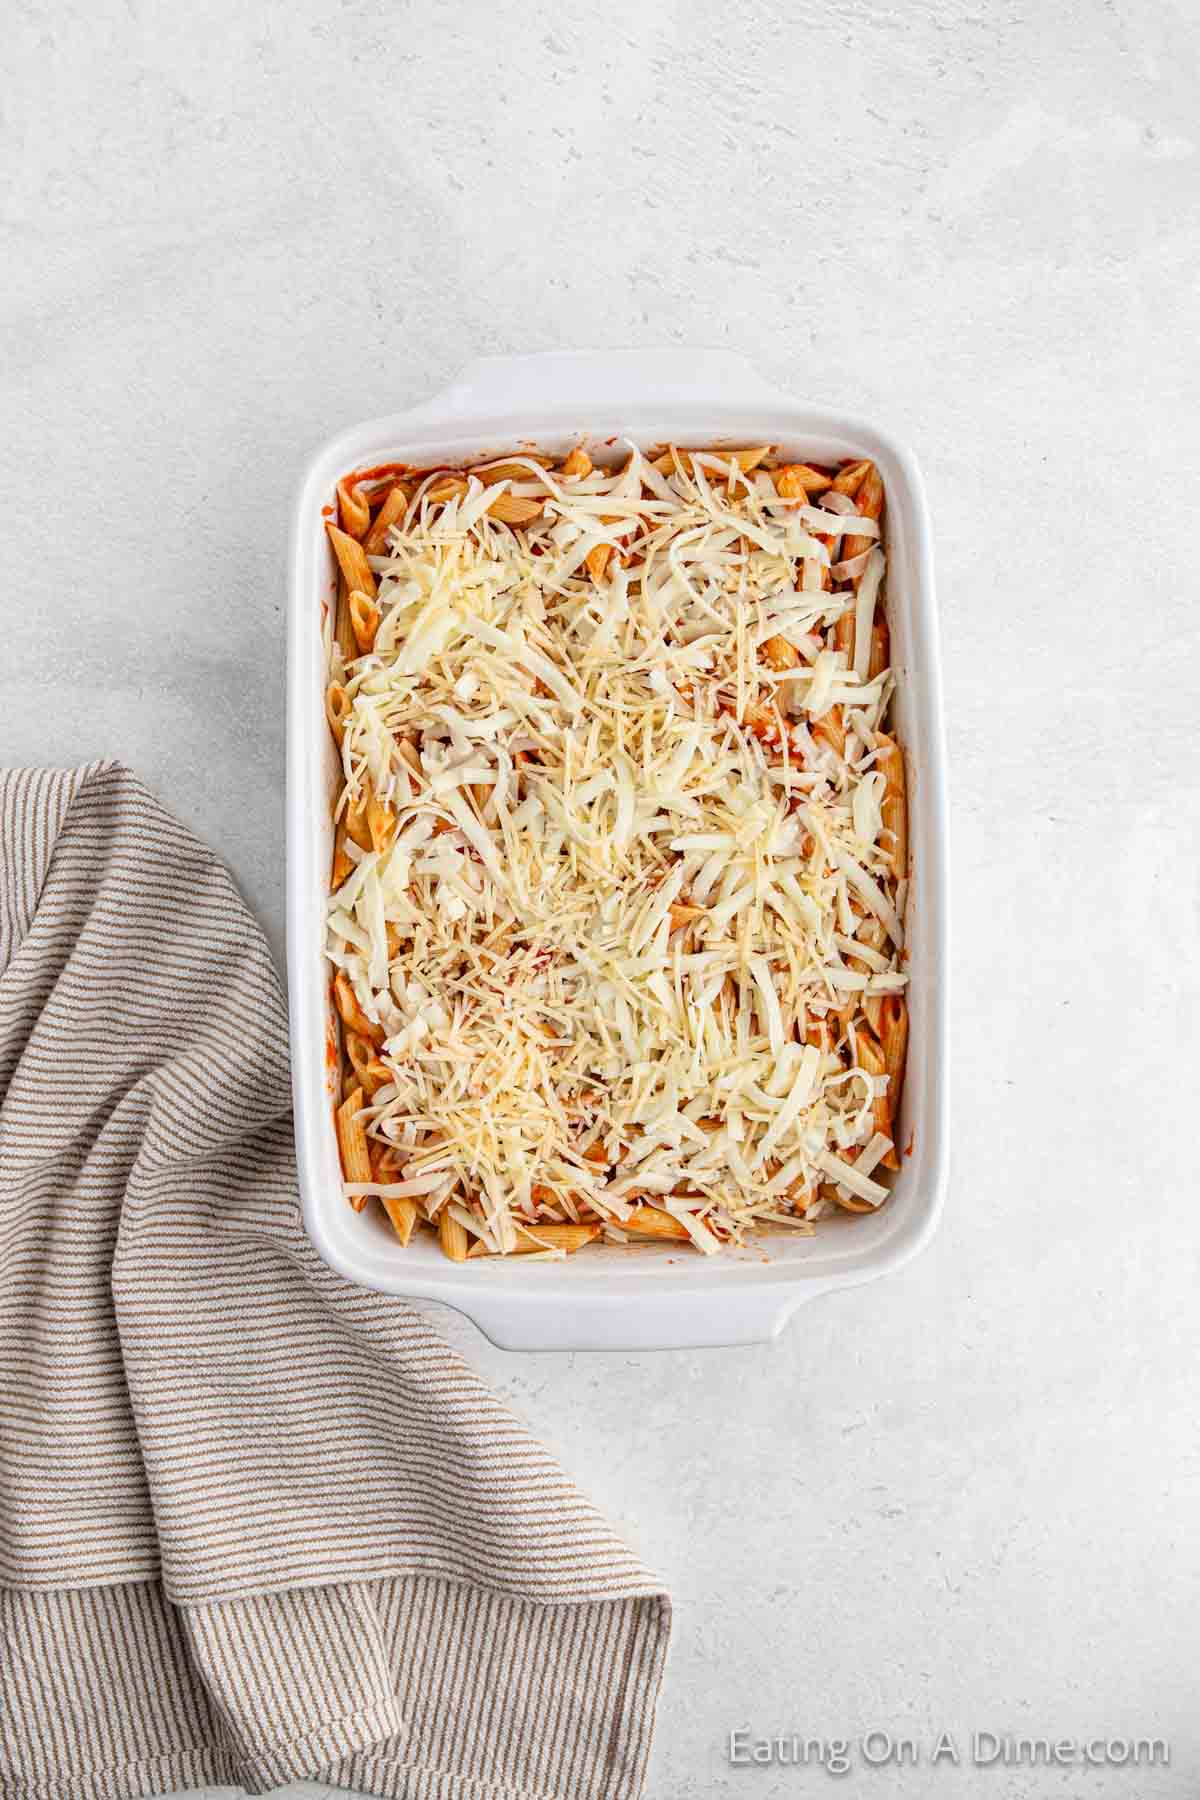 Toping with shredded cheese in the casserole dish